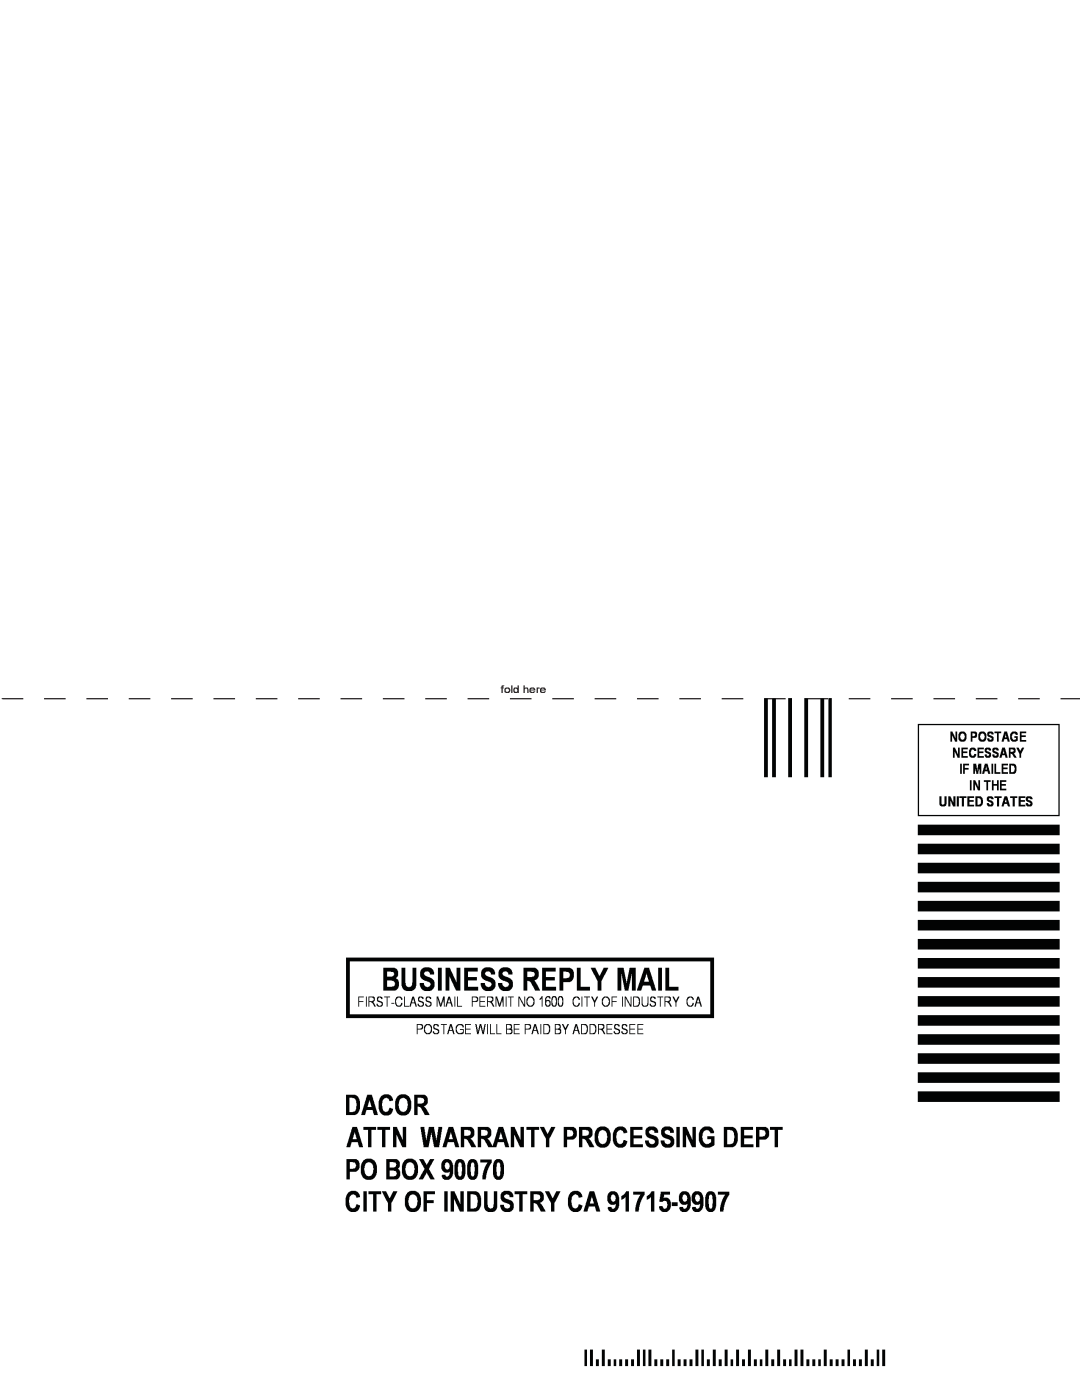 Dacor dacor Business Reply Mail, Dacor Attn Warranty Processing Dept Po Box, City Of Industry Ca, United States, fold here 